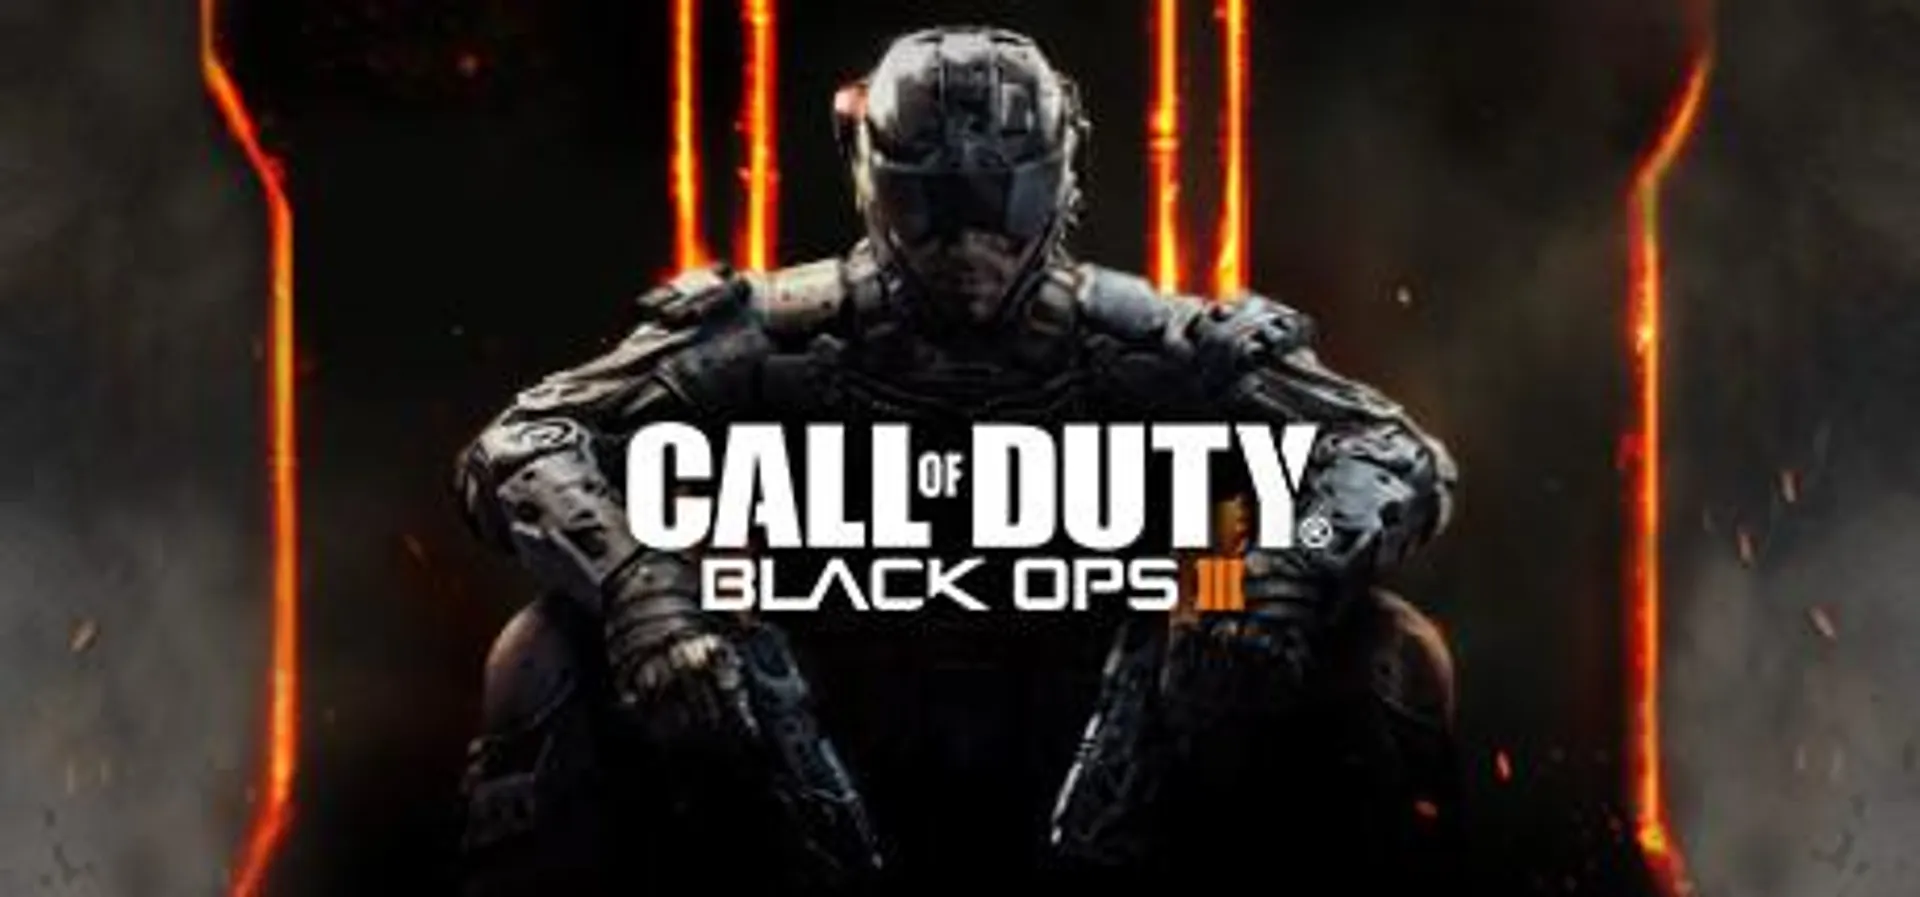 Save 67% on Call of Duty®: Black Ops III on Steam